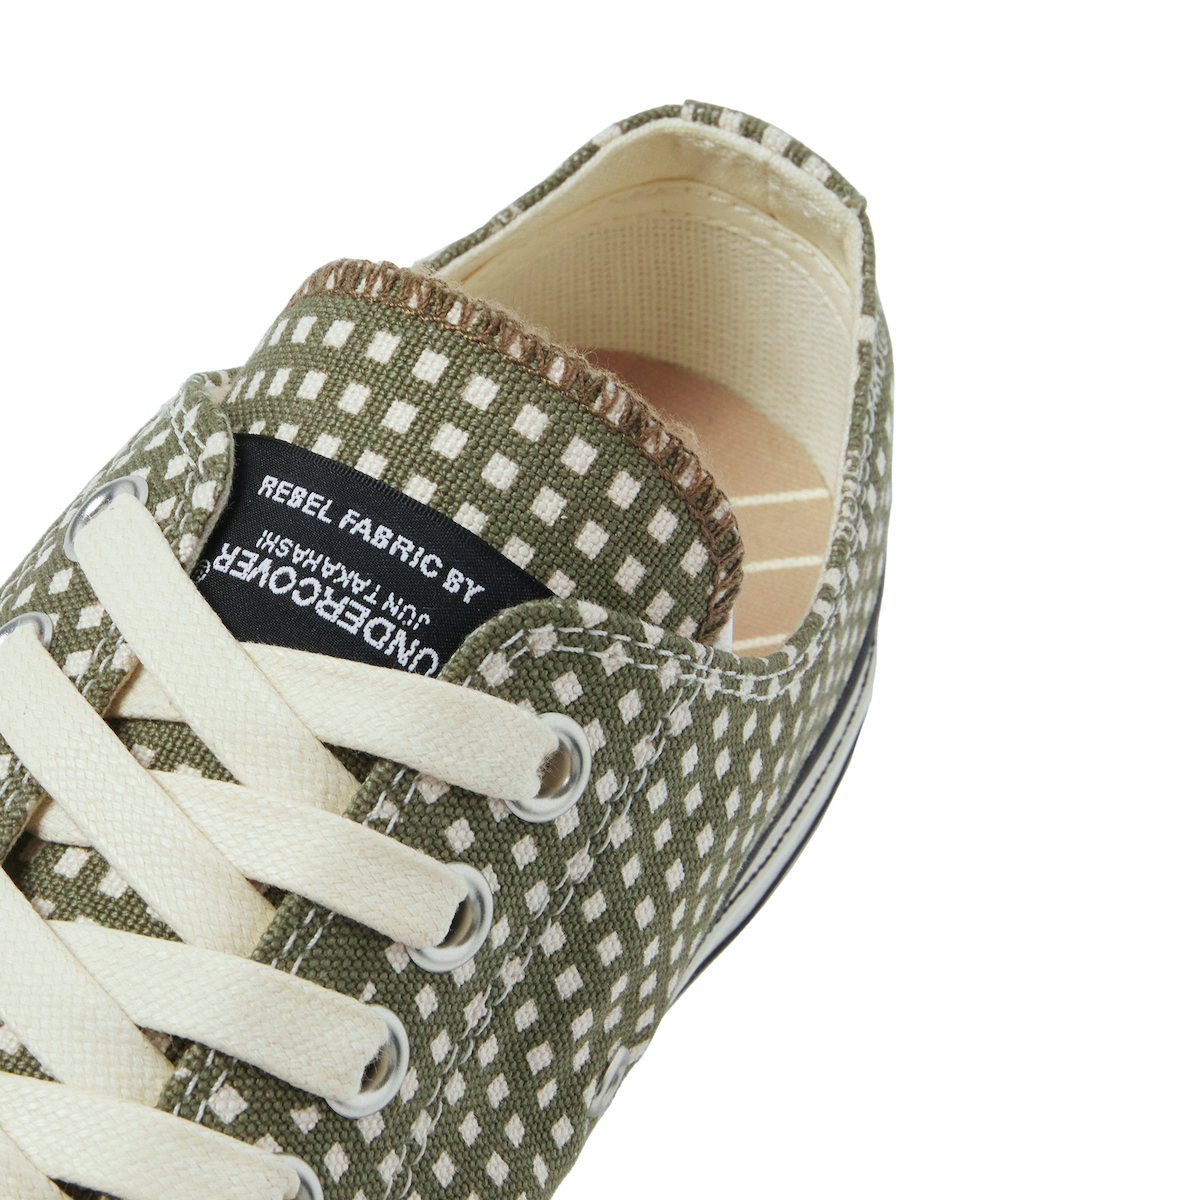 CONVERSE ADDICT / N.HOOLYWOOD REBEL FABRIC BY UNDERCOVER × CONVERSE ADDICT (KHK CHECK)タン